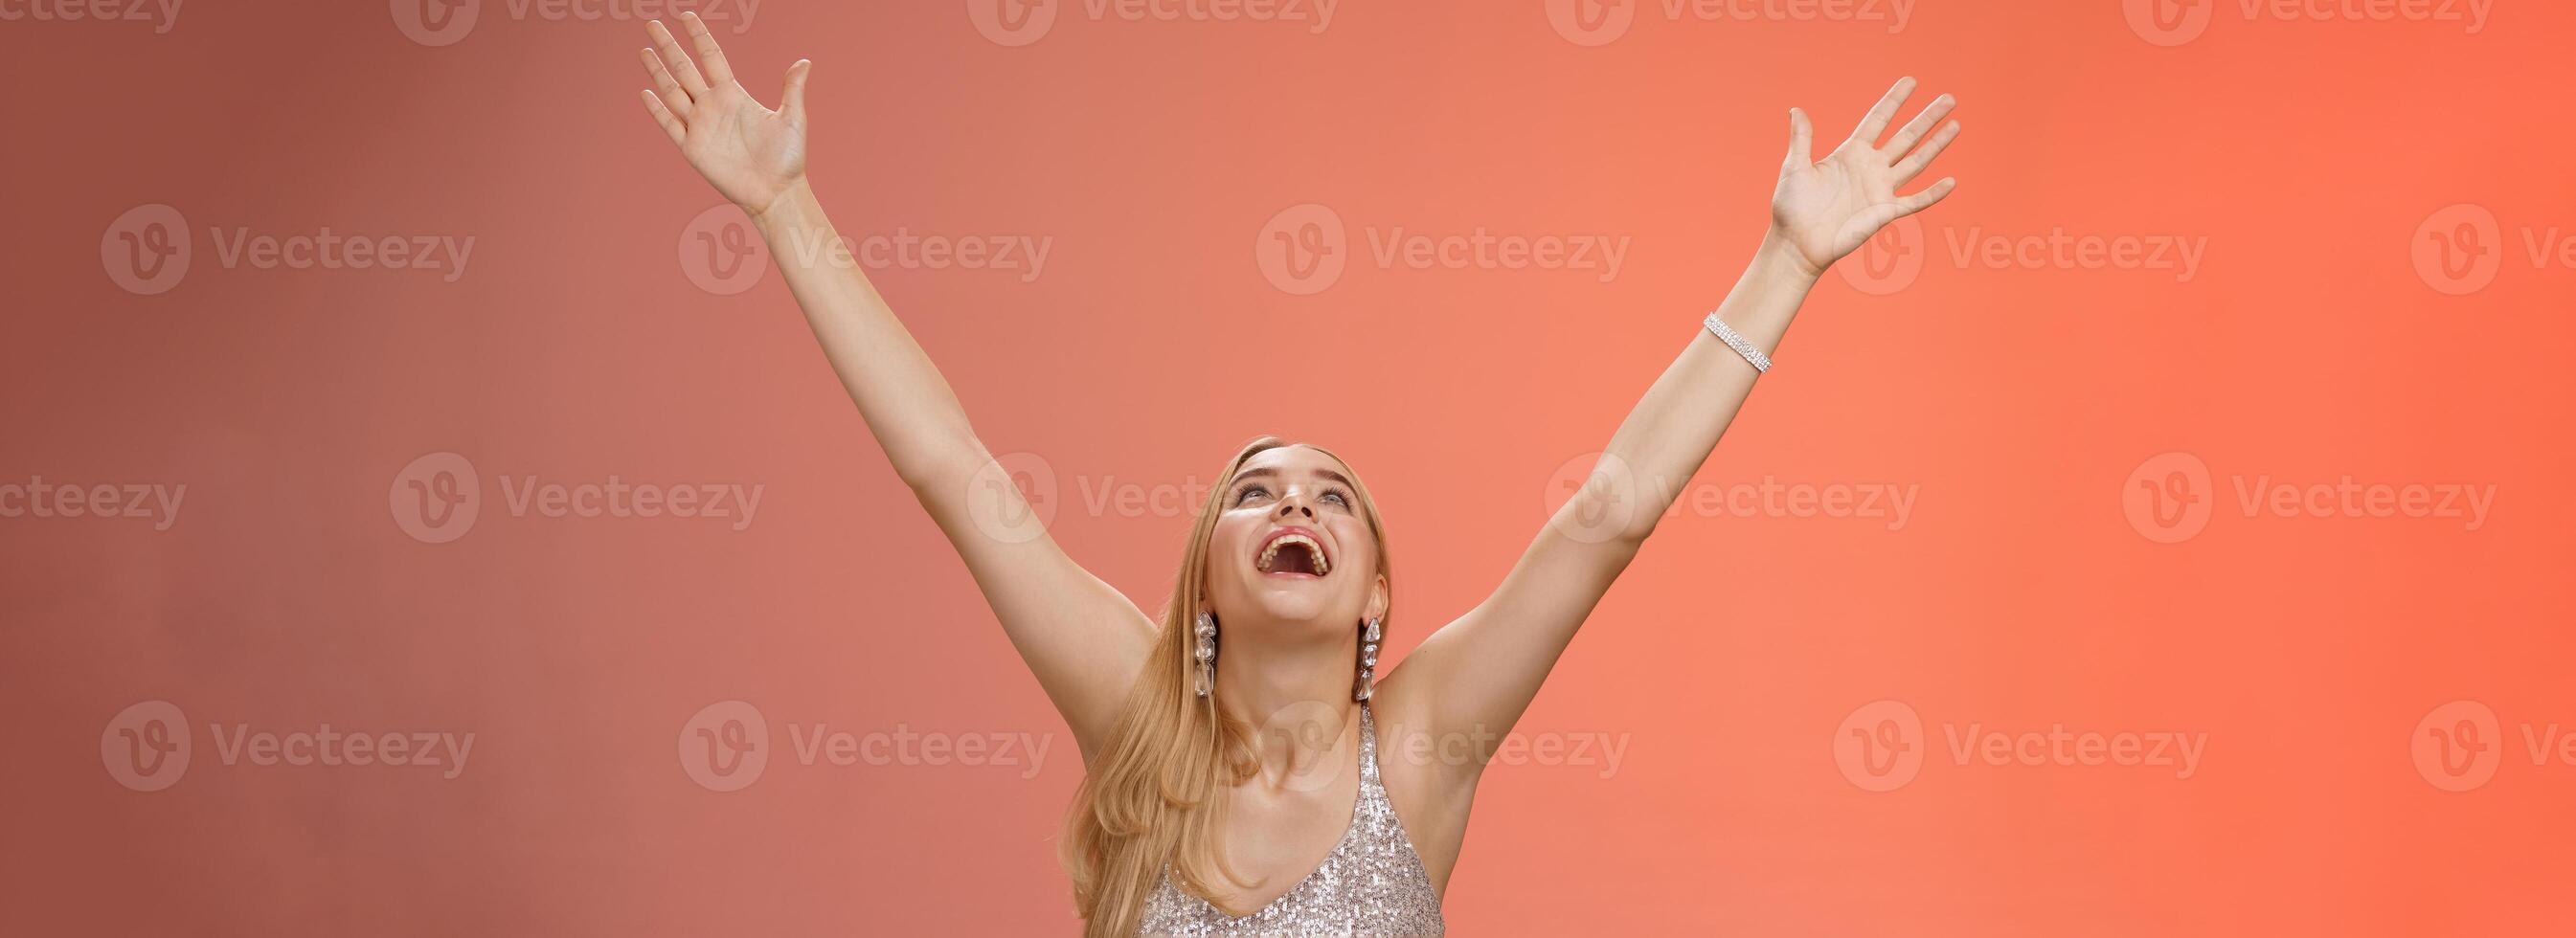 Happy emotive smiling overwhelmed young blond woman in silver dress raise hands sky thank god joyfully signed contract got job rejoicing red background celebrating victory good news, triumphing photo